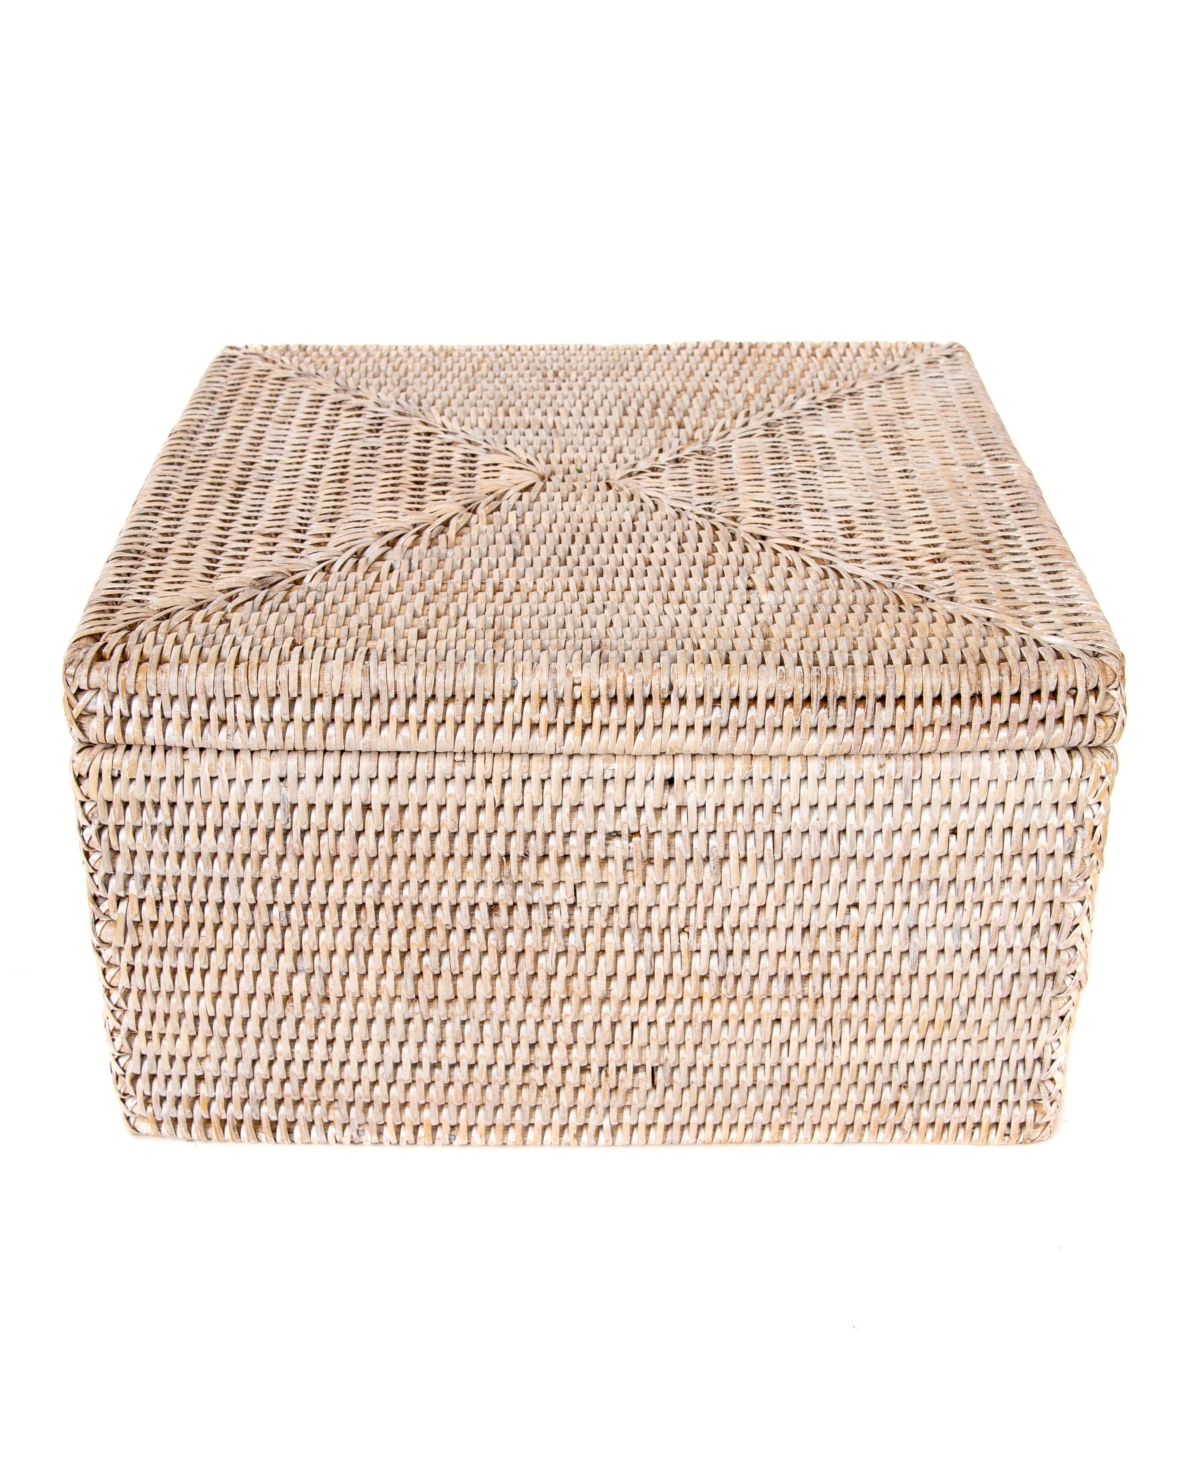 Artifacts Trading Company Artifacts Rattan Storage Box With Lid Letter File In Off-white